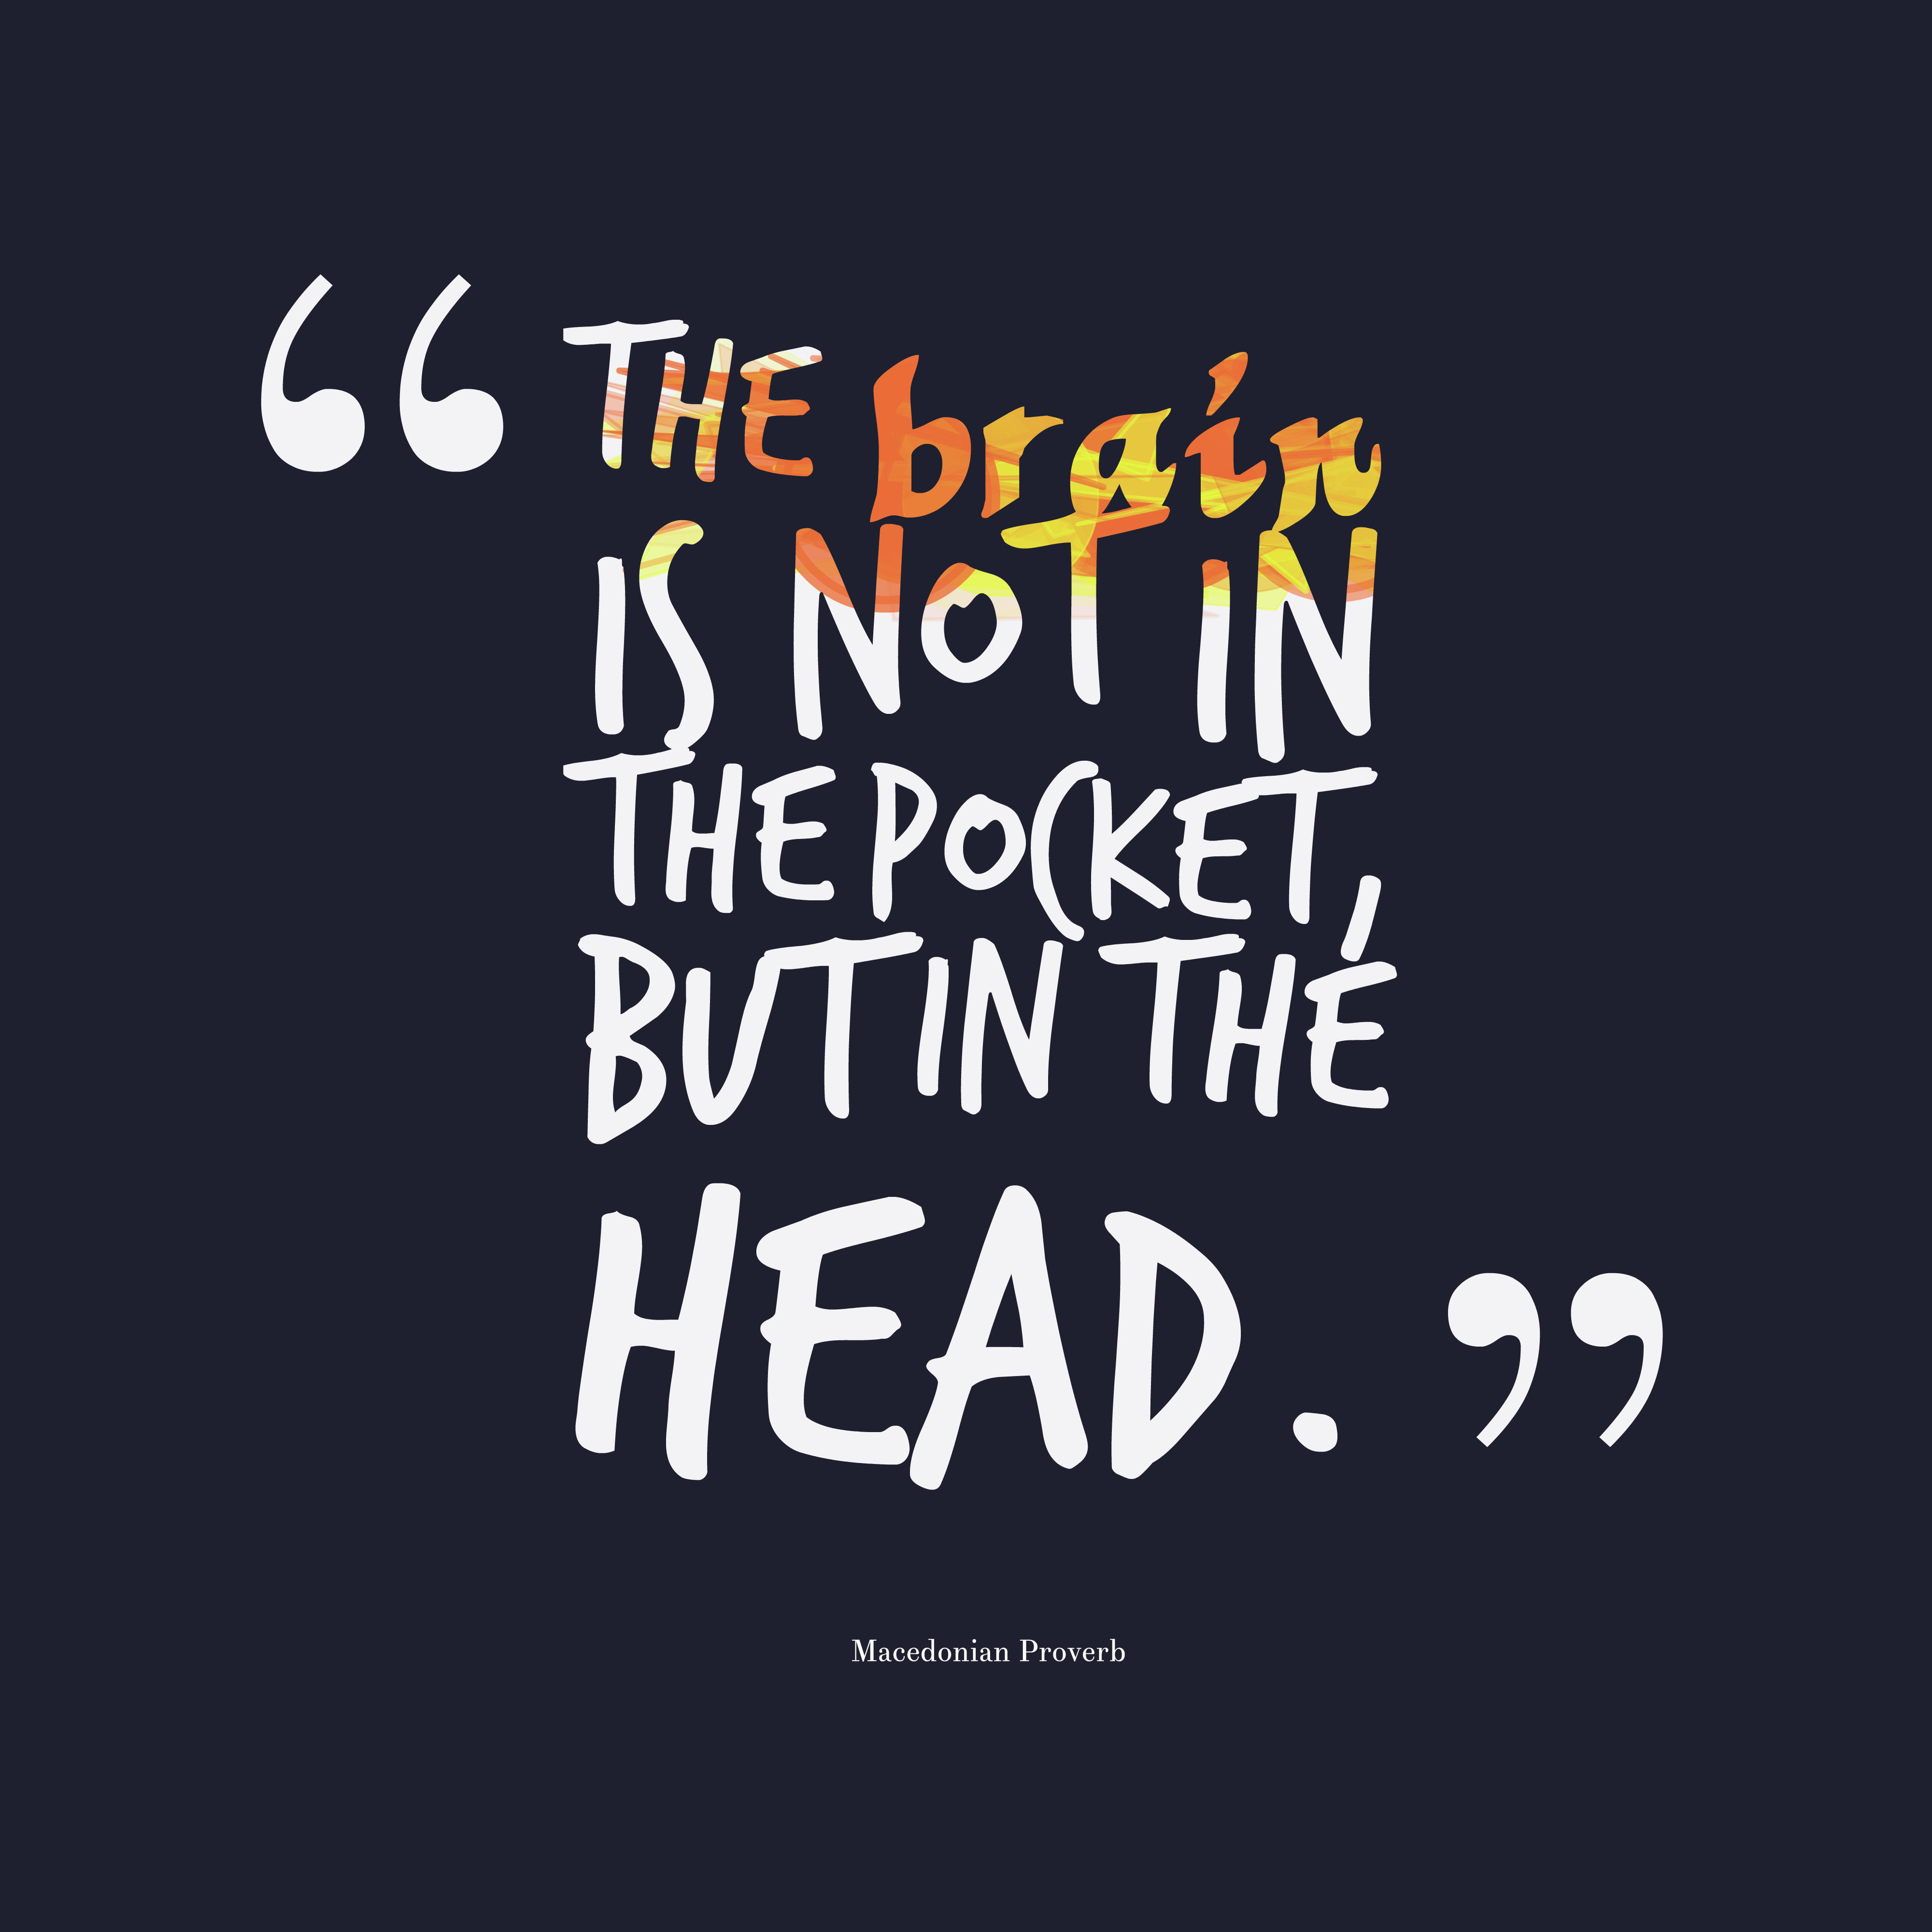 The brain is not in the pocket, but in the head.